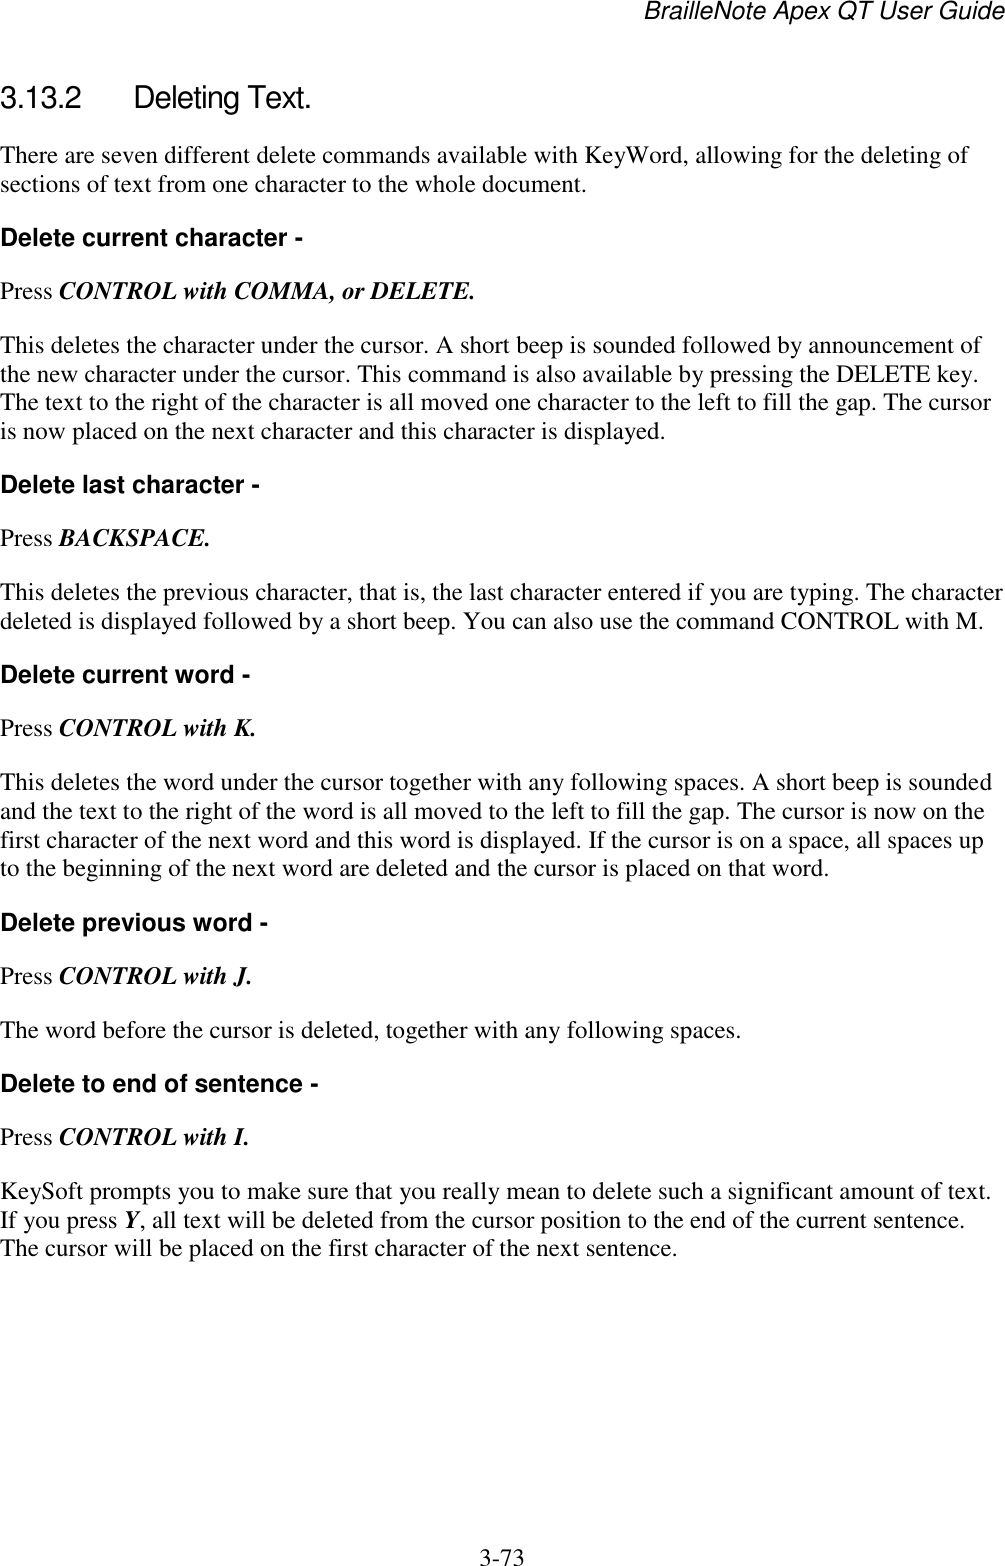 BrailleNote Apex QT User Guide  3-73   3.13.2  Deleting Text. There are seven different delete commands available with KeyWord, allowing for the deleting of sections of text from one character to the whole document. Delete current character - Press CONTROL with COMMA, or DELETE. This deletes the character under the cursor. A short beep is sounded followed by announcement of the new character under the cursor. This command is also available by pressing the DELETE key. The text to the right of the character is all moved one character to the left to fill the gap. The cursor is now placed on the next character and this character is displayed. Delete last character - Press BACKSPACE. This deletes the previous character, that is, the last character entered if you are typing. The character deleted is displayed followed by a short beep. You can also use the command CONTROL with M. Delete current word - Press CONTROL with K. This deletes the word under the cursor together with any following spaces. A short beep is sounded and the text to the right of the word is all moved to the left to fill the gap. The cursor is now on the first character of the next word and this word is displayed. If the cursor is on a space, all spaces up to the beginning of the next word are deleted and the cursor is placed on that word. Delete previous word - Press CONTROL with J. The word before the cursor is deleted, together with any following spaces. Delete to end of sentence - Press CONTROL with I. KeySoft prompts you to make sure that you really mean to delete such a significant amount of text. If you press Y, all text will be deleted from the cursor position to the end of the current sentence. The cursor will be placed on the first character of the next sentence.  